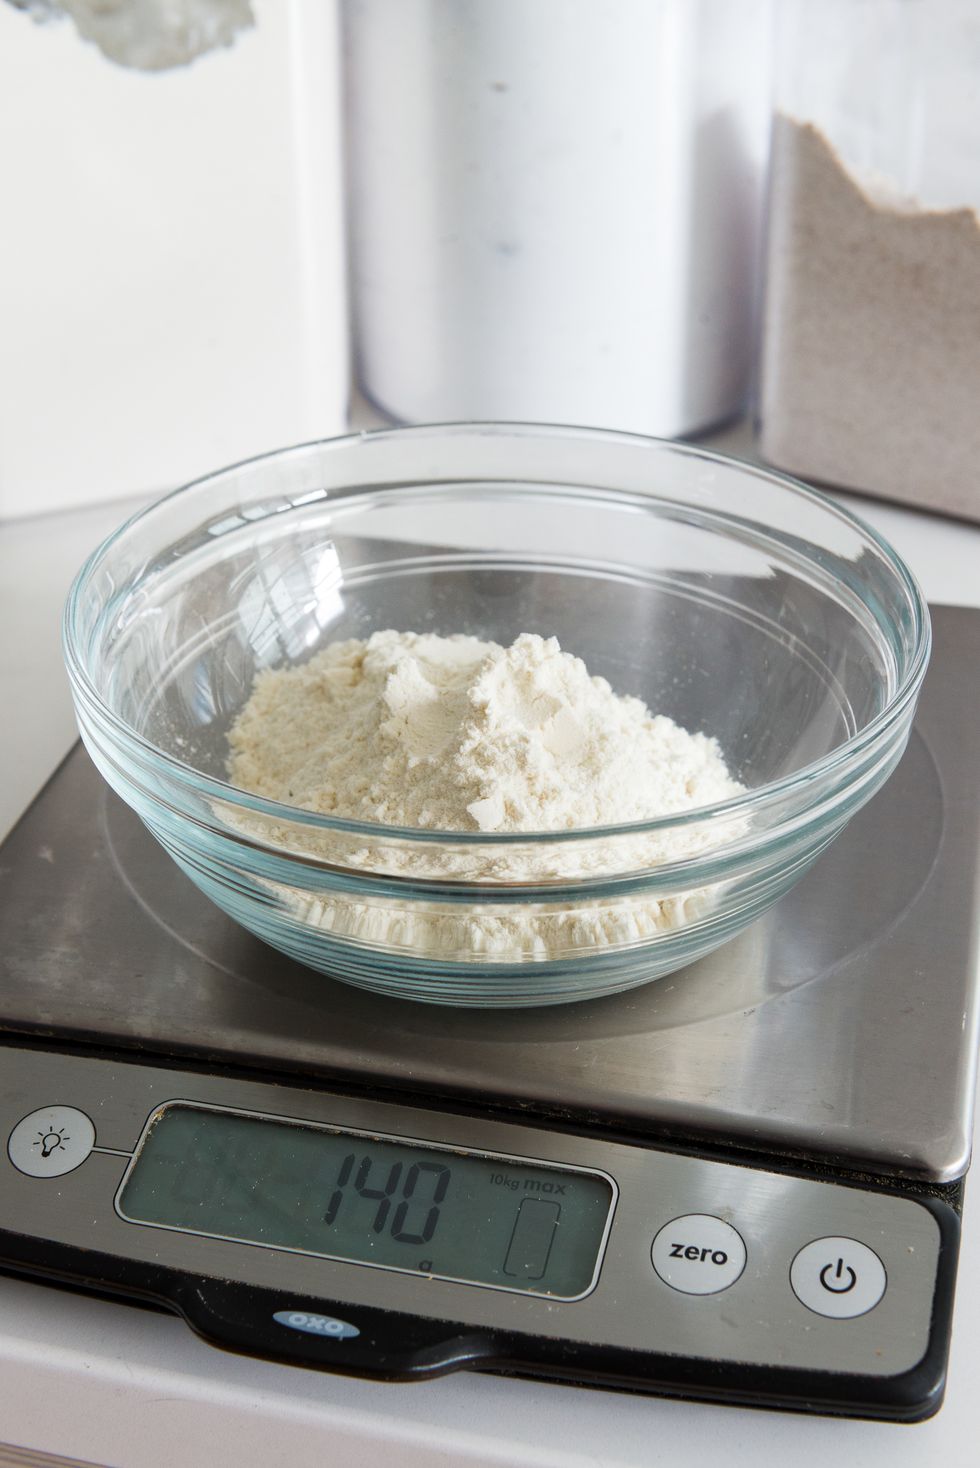 Favorite Baking Tools: The Kitchen Scale